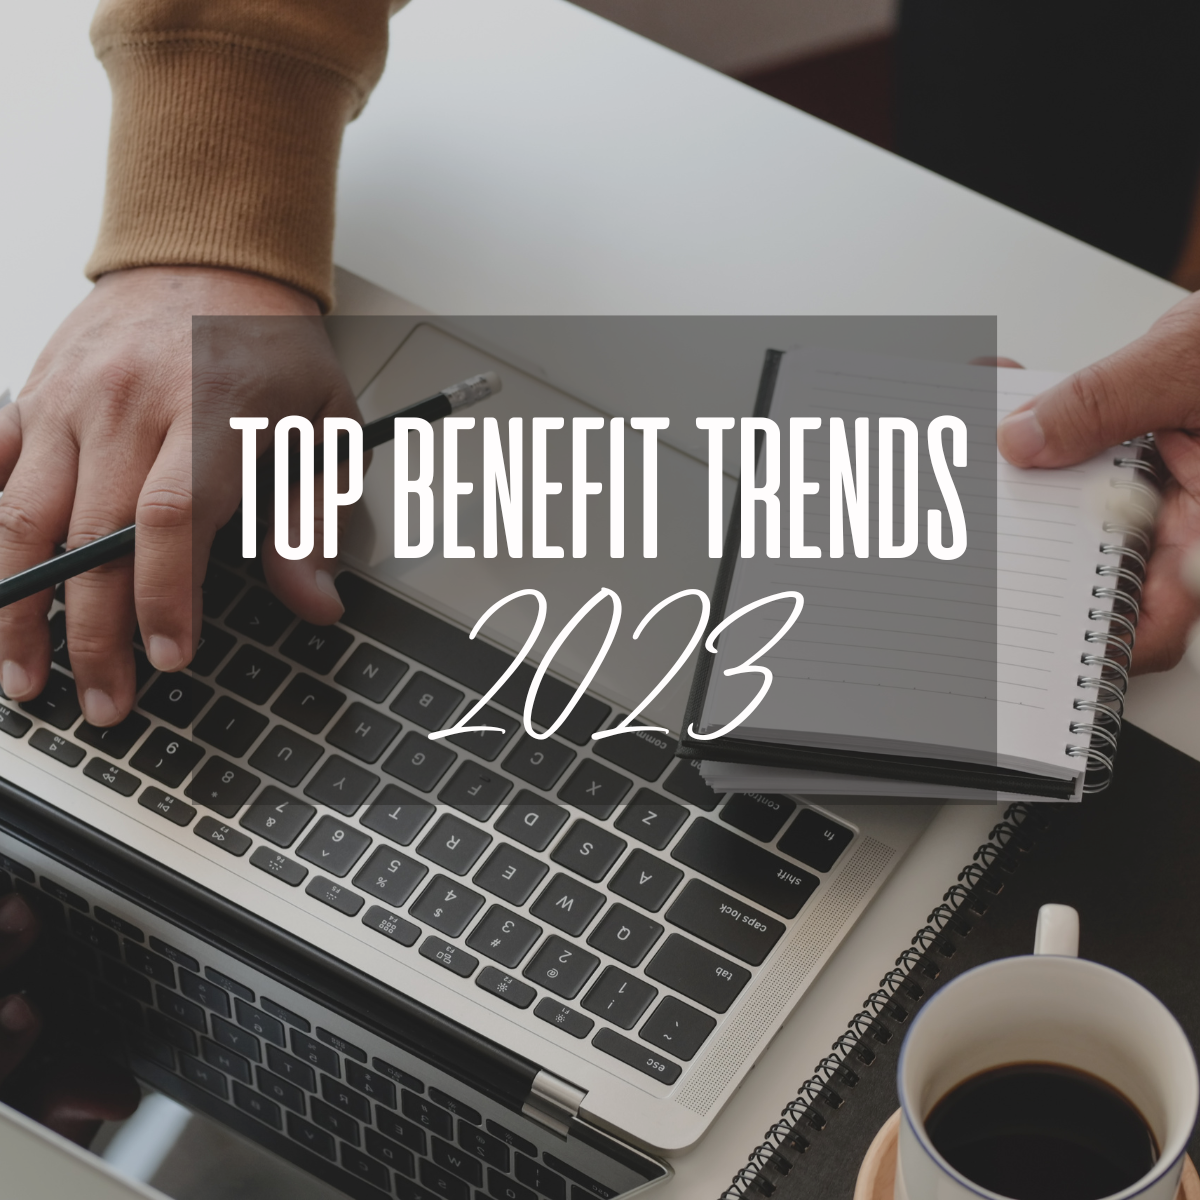 Top Benefit Trends for 2023 Image